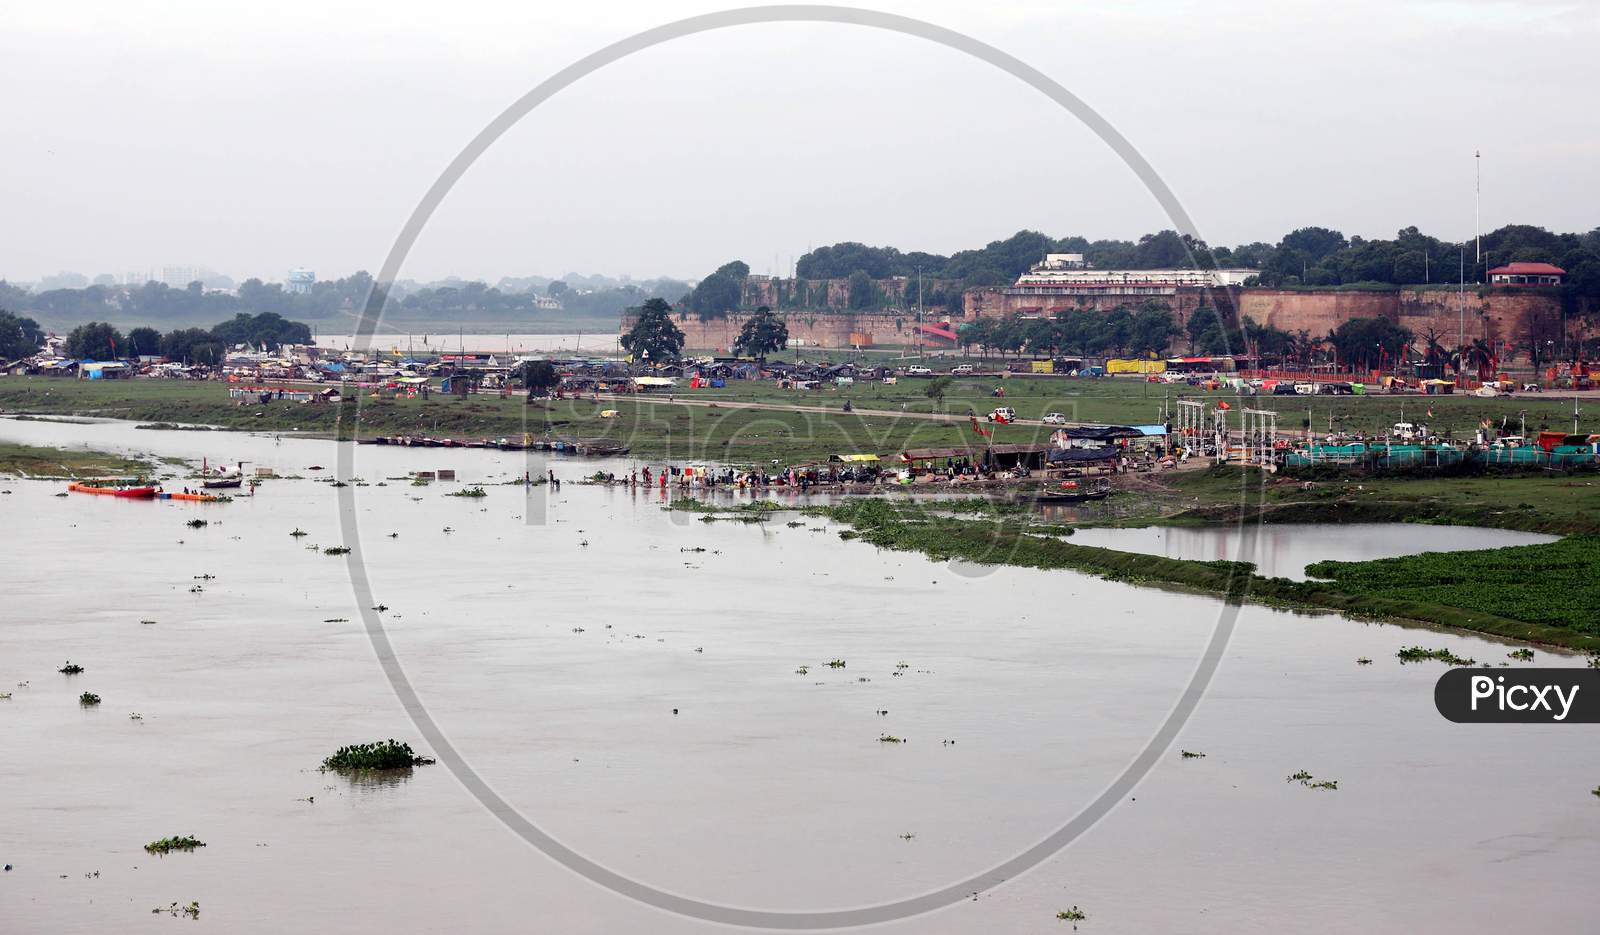 A View Of Ghats Submerged In The Flooded Water Of River Ganga And Yamuna After Heavy Rains In Prayagraj, August 23, 2020